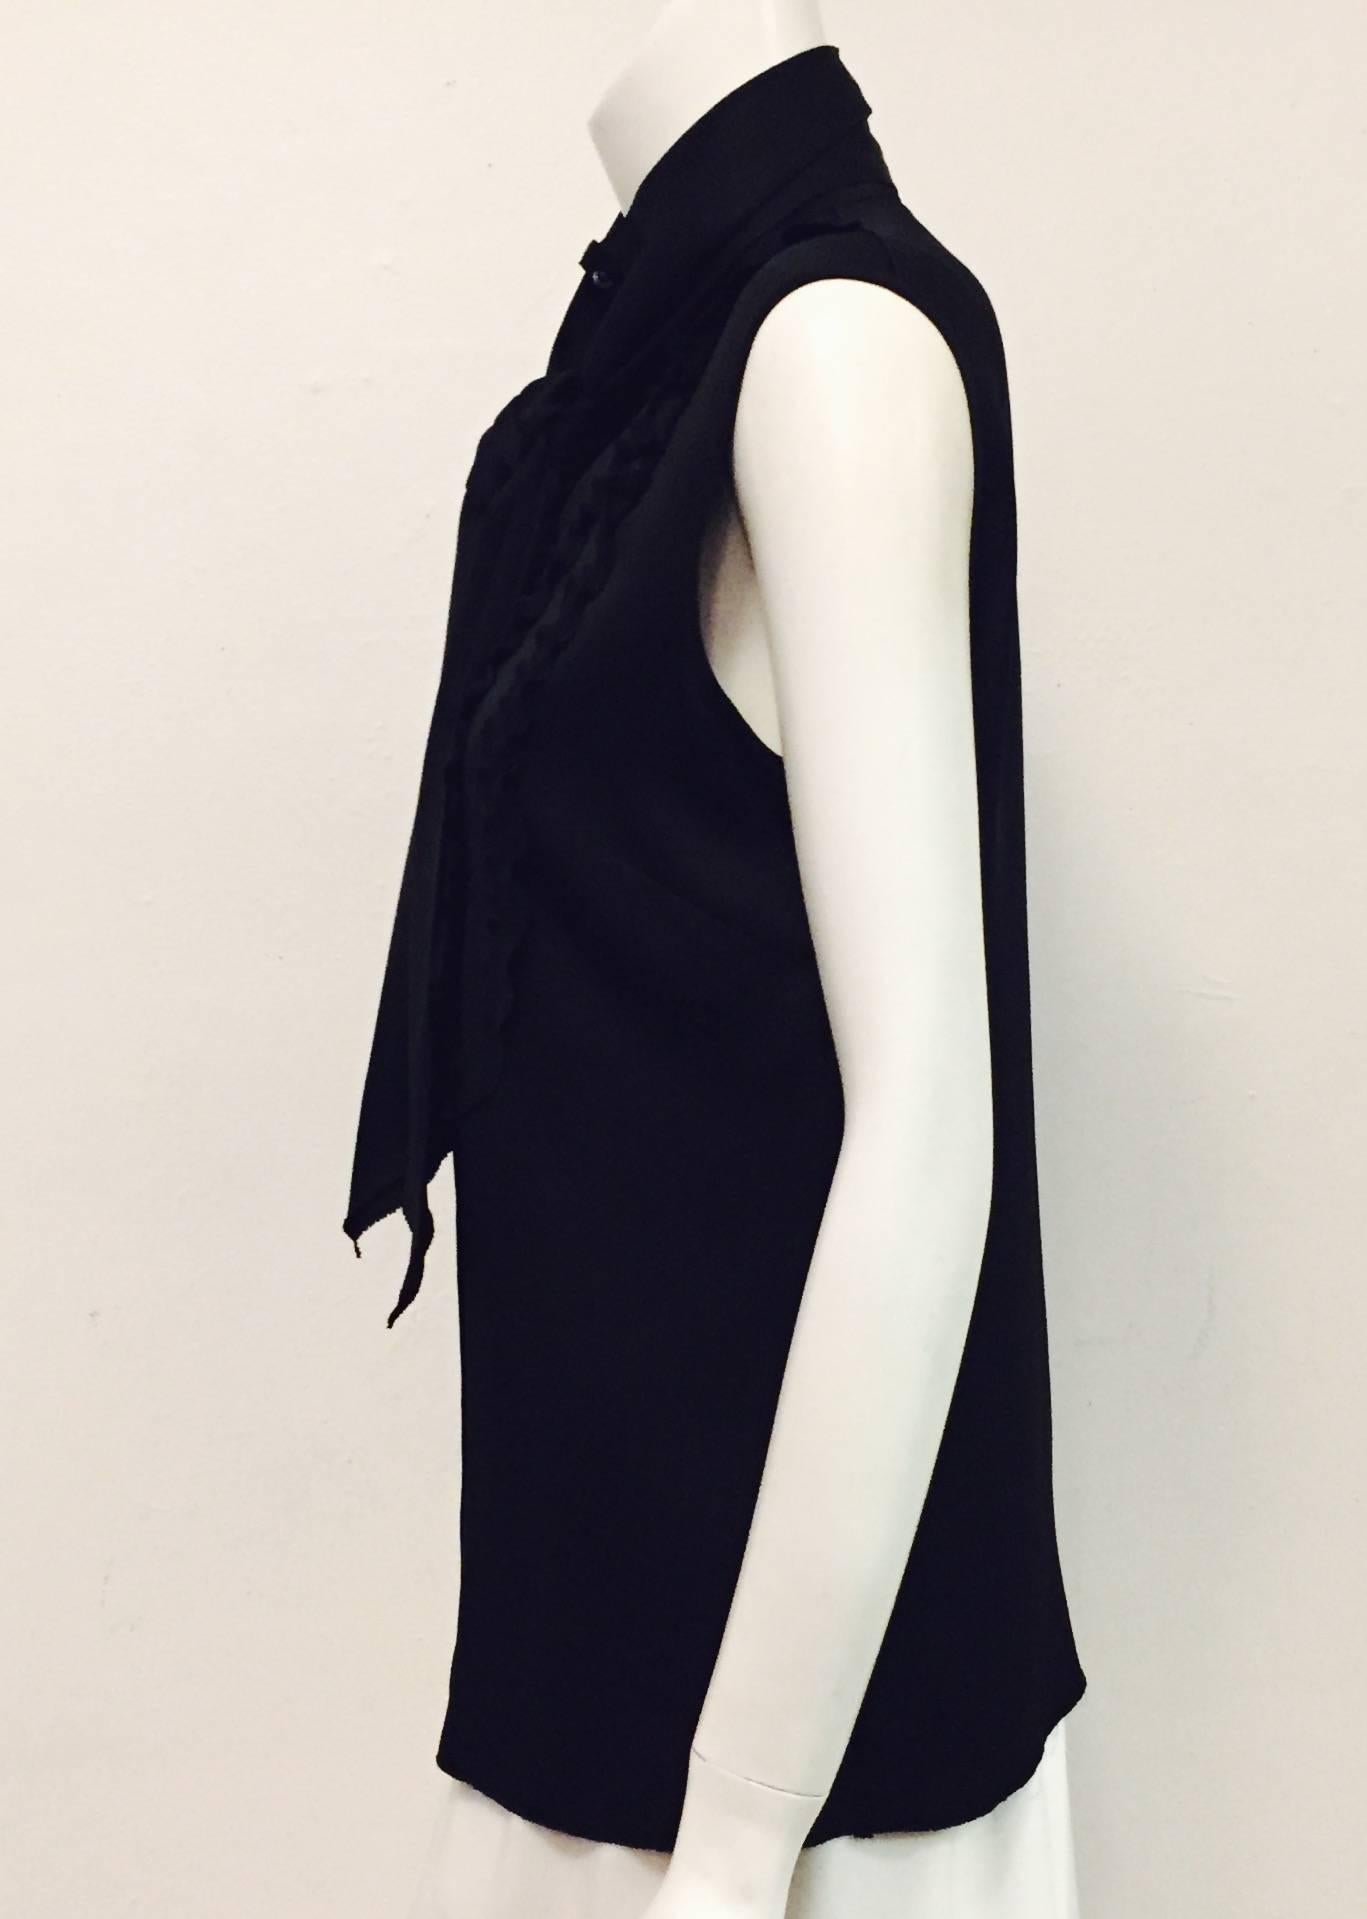 Conceptually Creative Chanel Black Silk Tuxedo Style Blouse with Up Collar In Excellent Condition For Sale In Palm Beach, FL